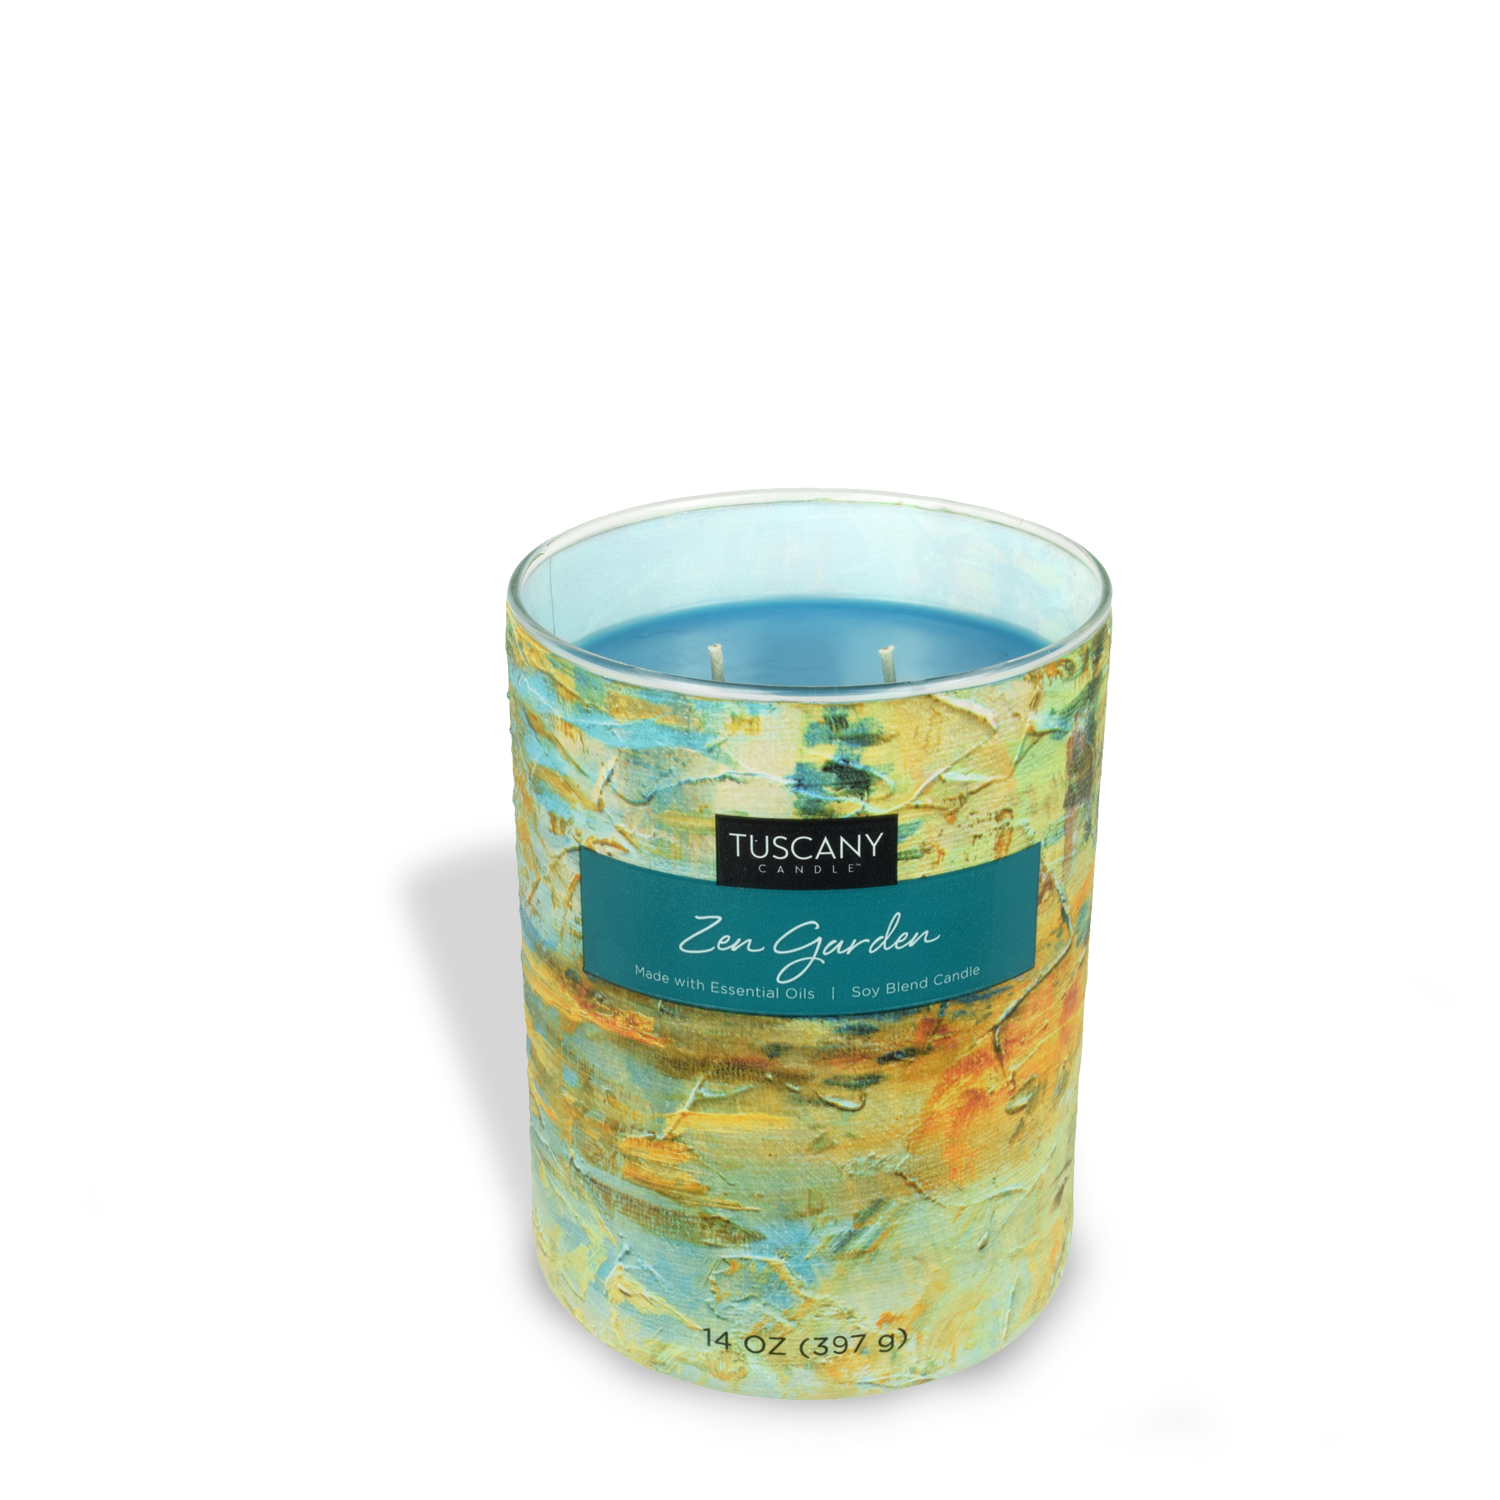 A Zen Garden Scented Jar Candle (14 oz) from the Tuscany Candle brand, with a blue and green design on it, perfect for adding to your Home Décor ambiance.